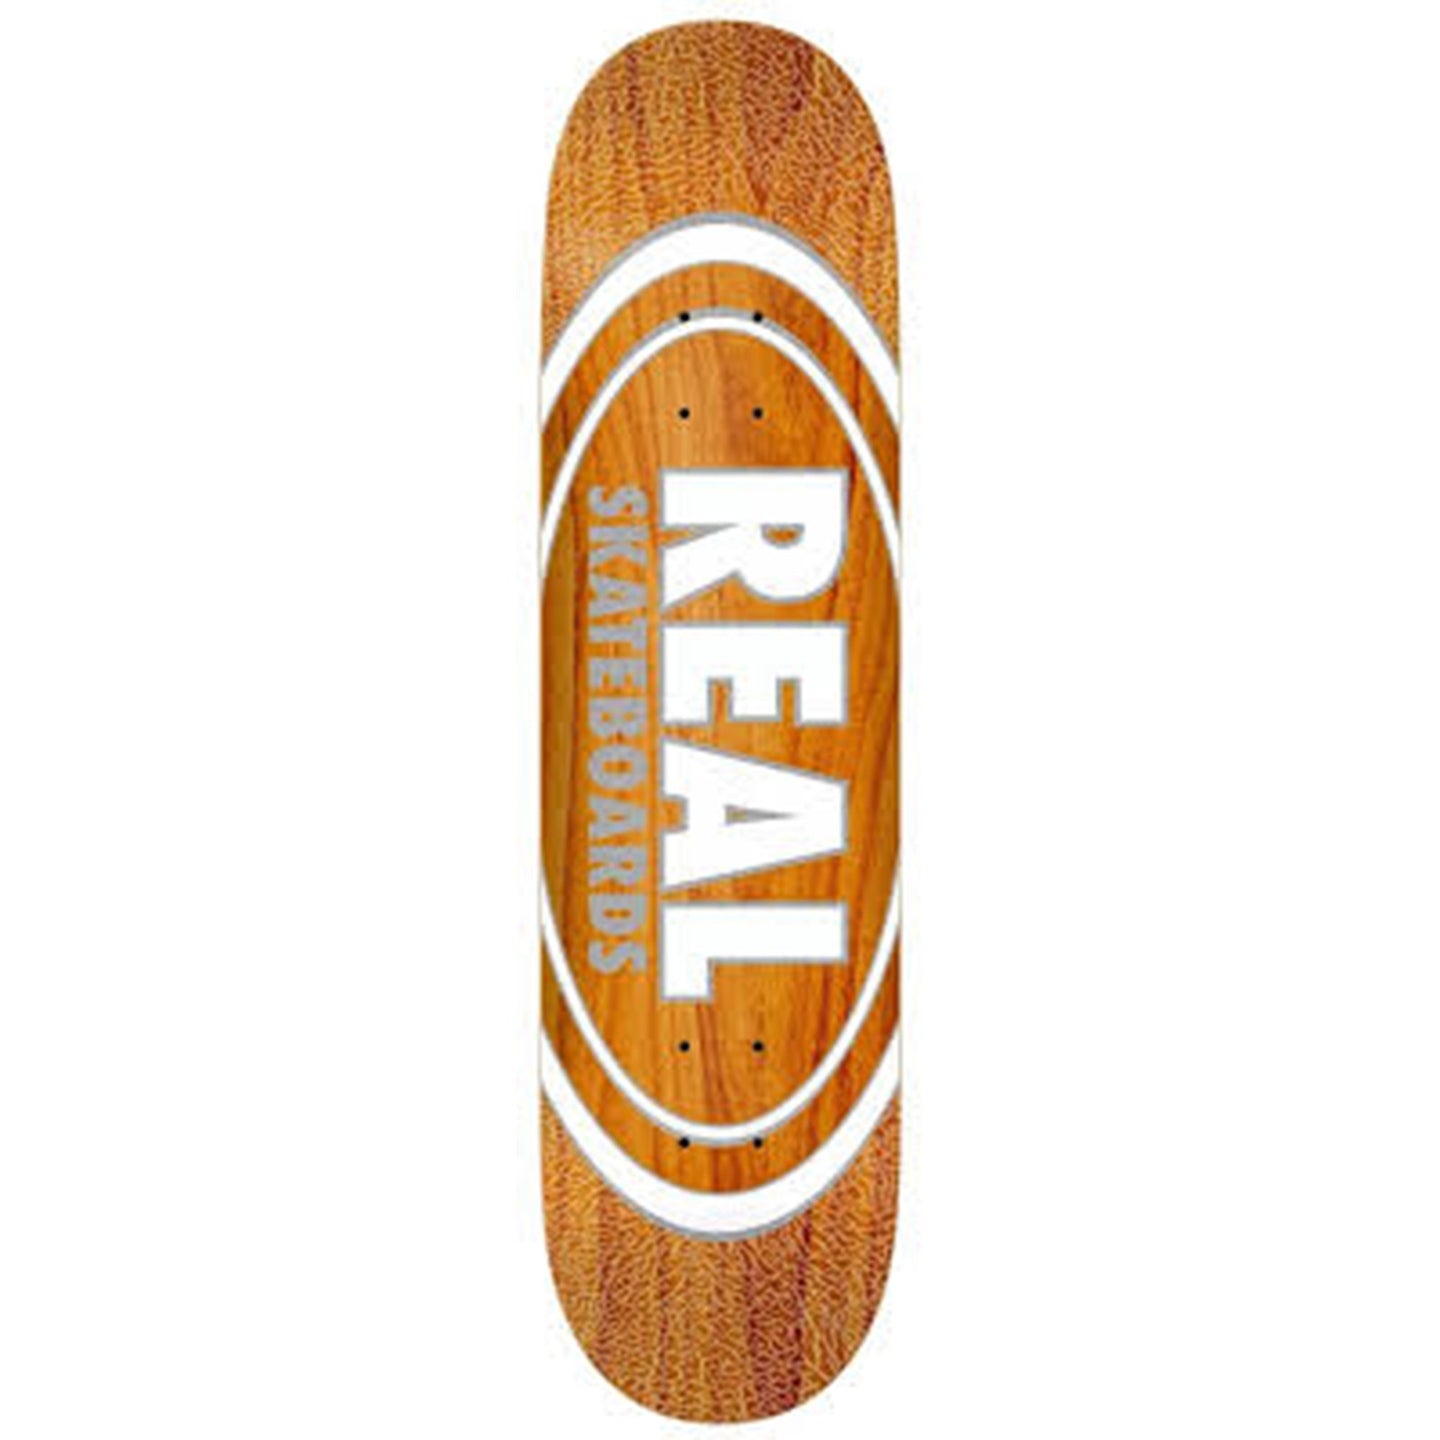 Real Oval Pearl Patterns 8.75